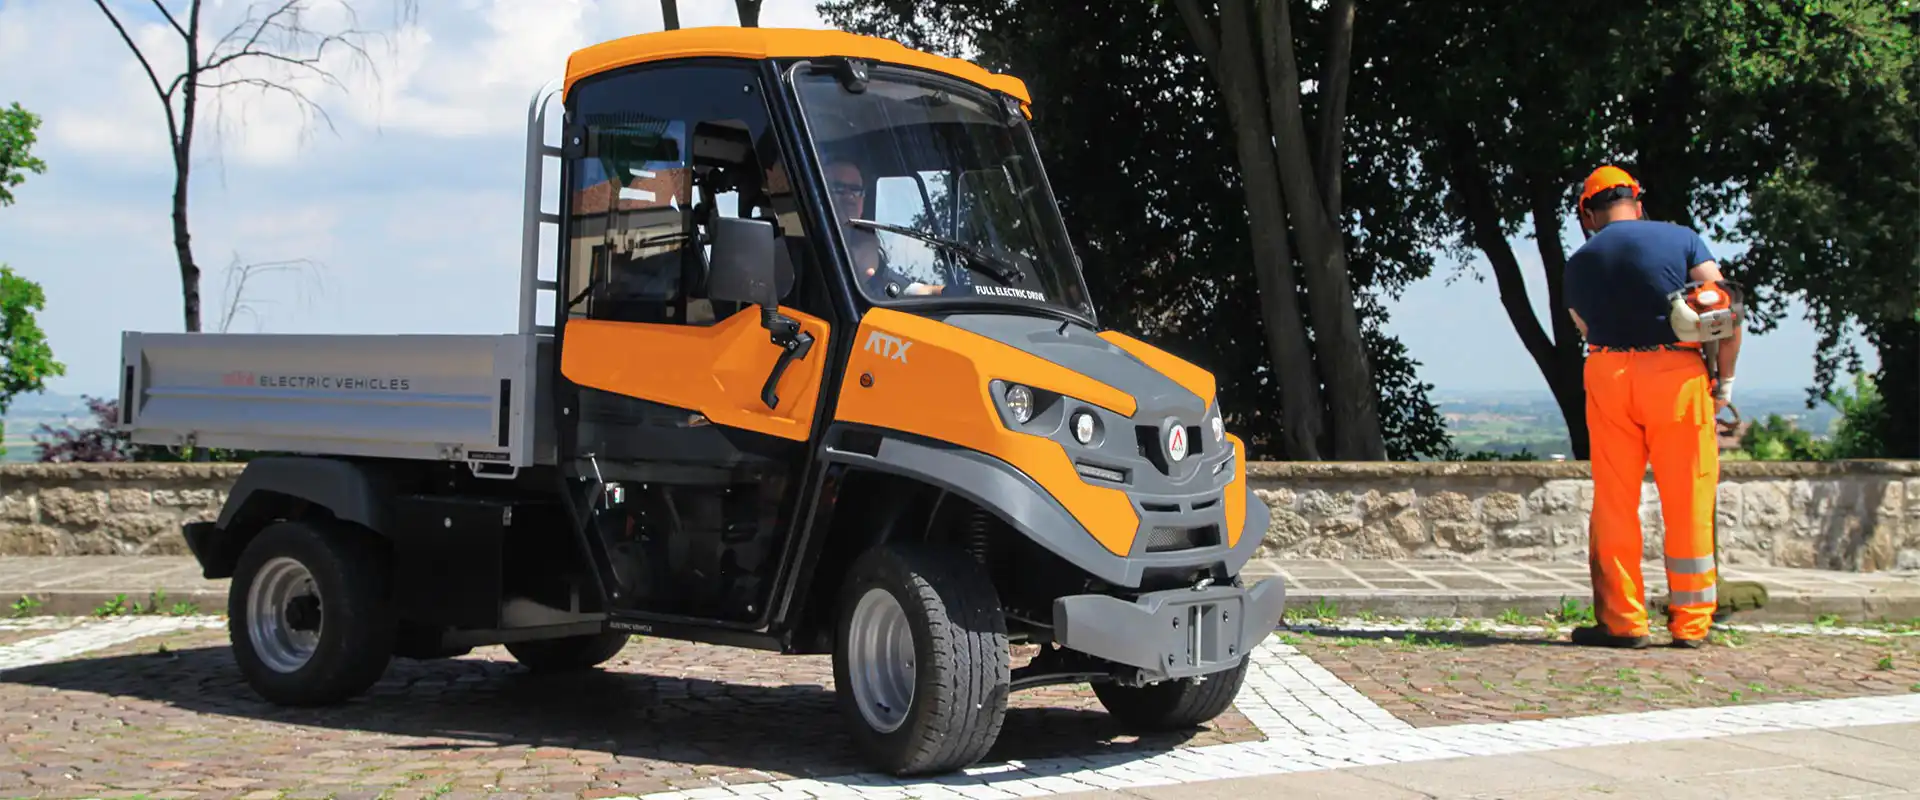 Green transition to Electric utility vehicles